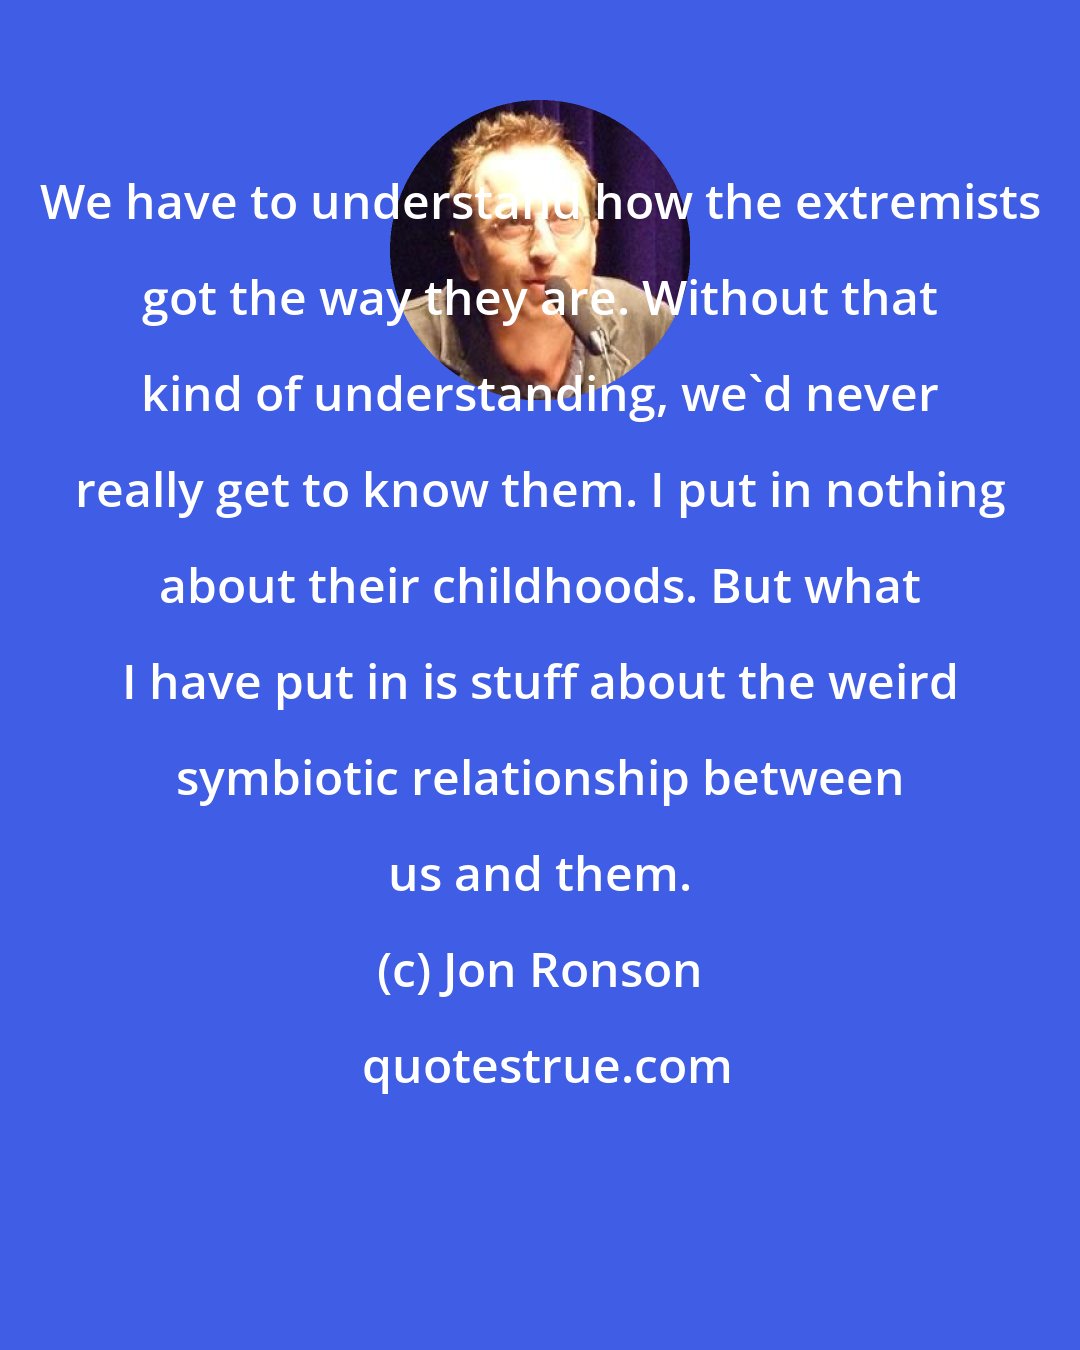 Jon Ronson: We have to understand how the extremists got the way they are. Without that kind of understanding, we'd never really get to know them. I put in nothing about their childhoods. But what I have put in is stuff about the weird symbiotic relationship between us and them.